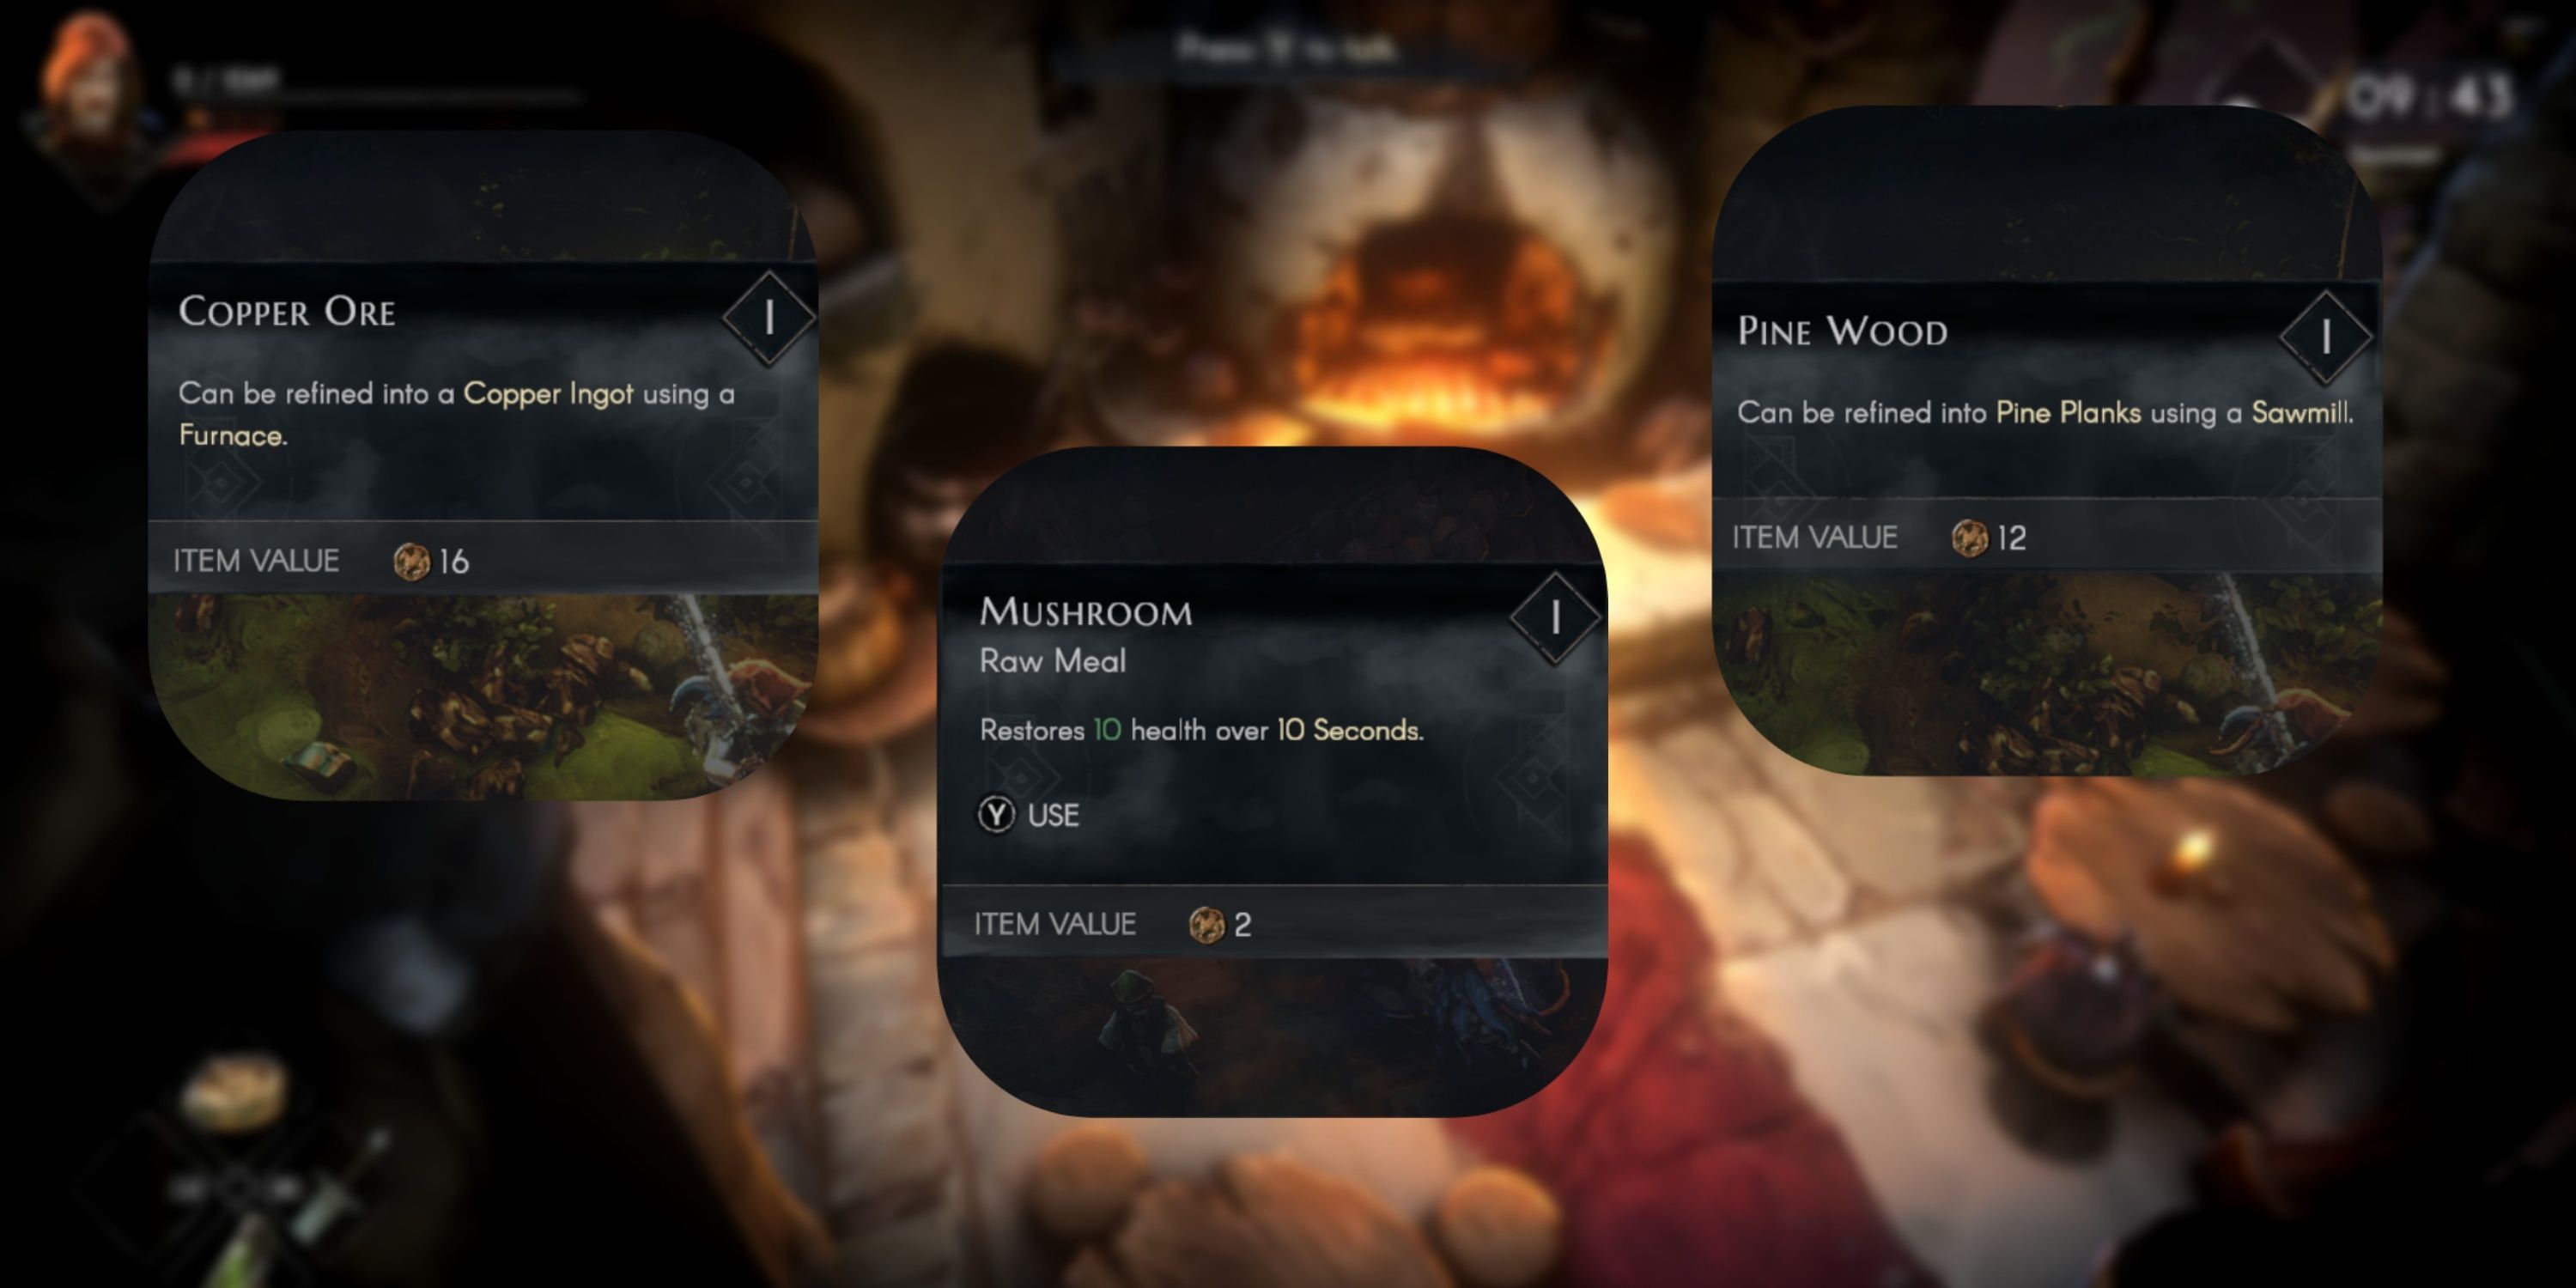 The in-game descriptions of Copper Ore, Mushroom, and Pine Wood in No Rest For The Wicked